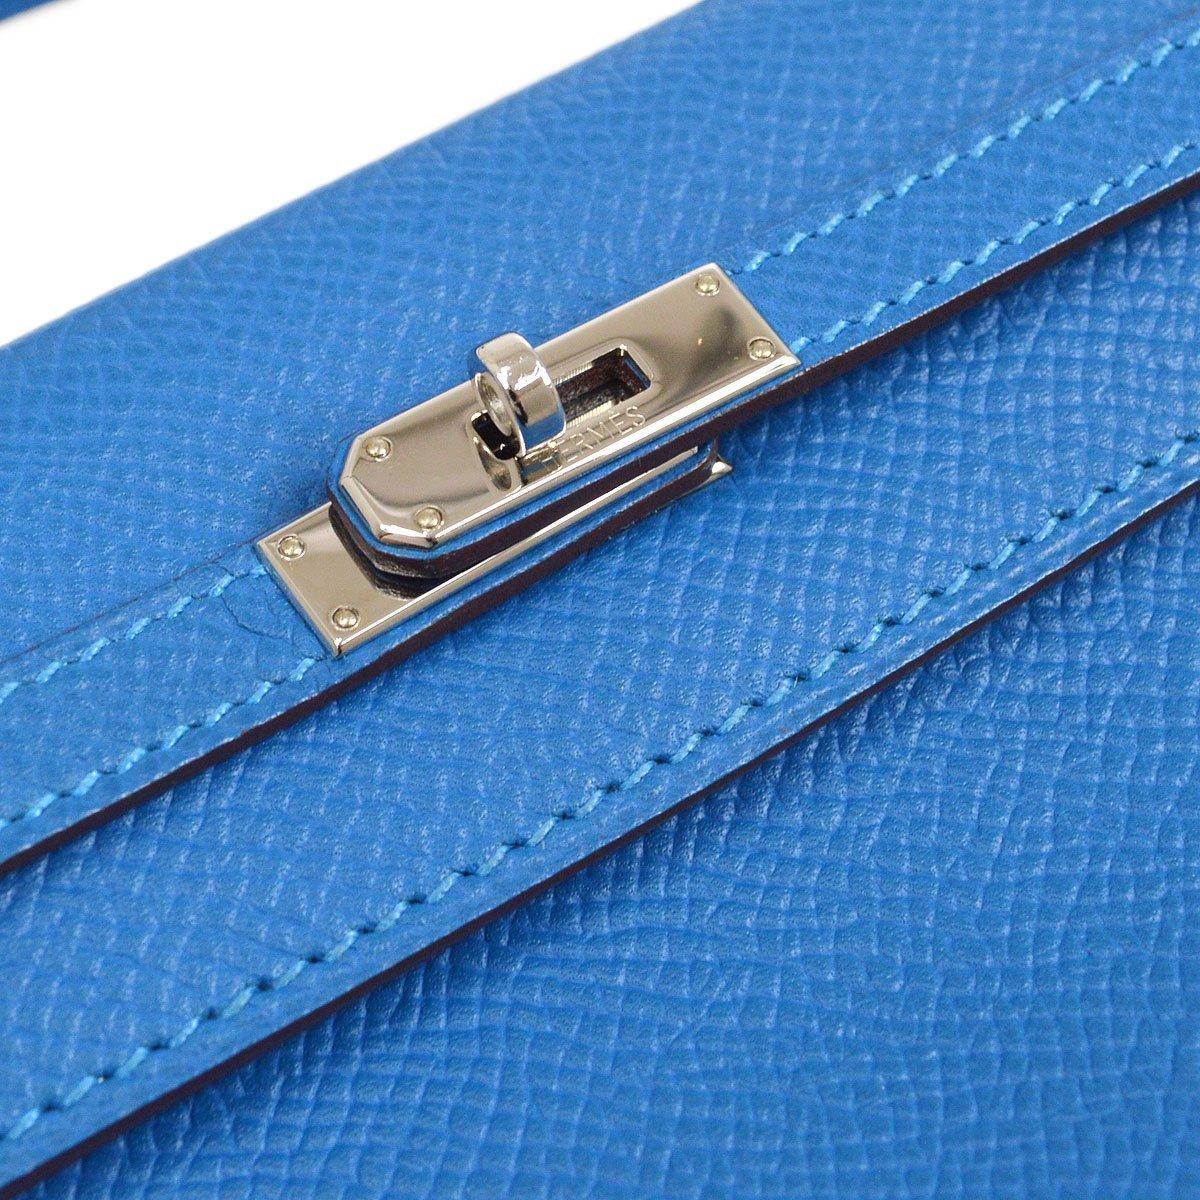 Pre-Owned Condition
2011 Collection
Bleu Mykonos
Veau Epsom Leather
Palladium Hardware
Leather Lining 
Measures 5.75